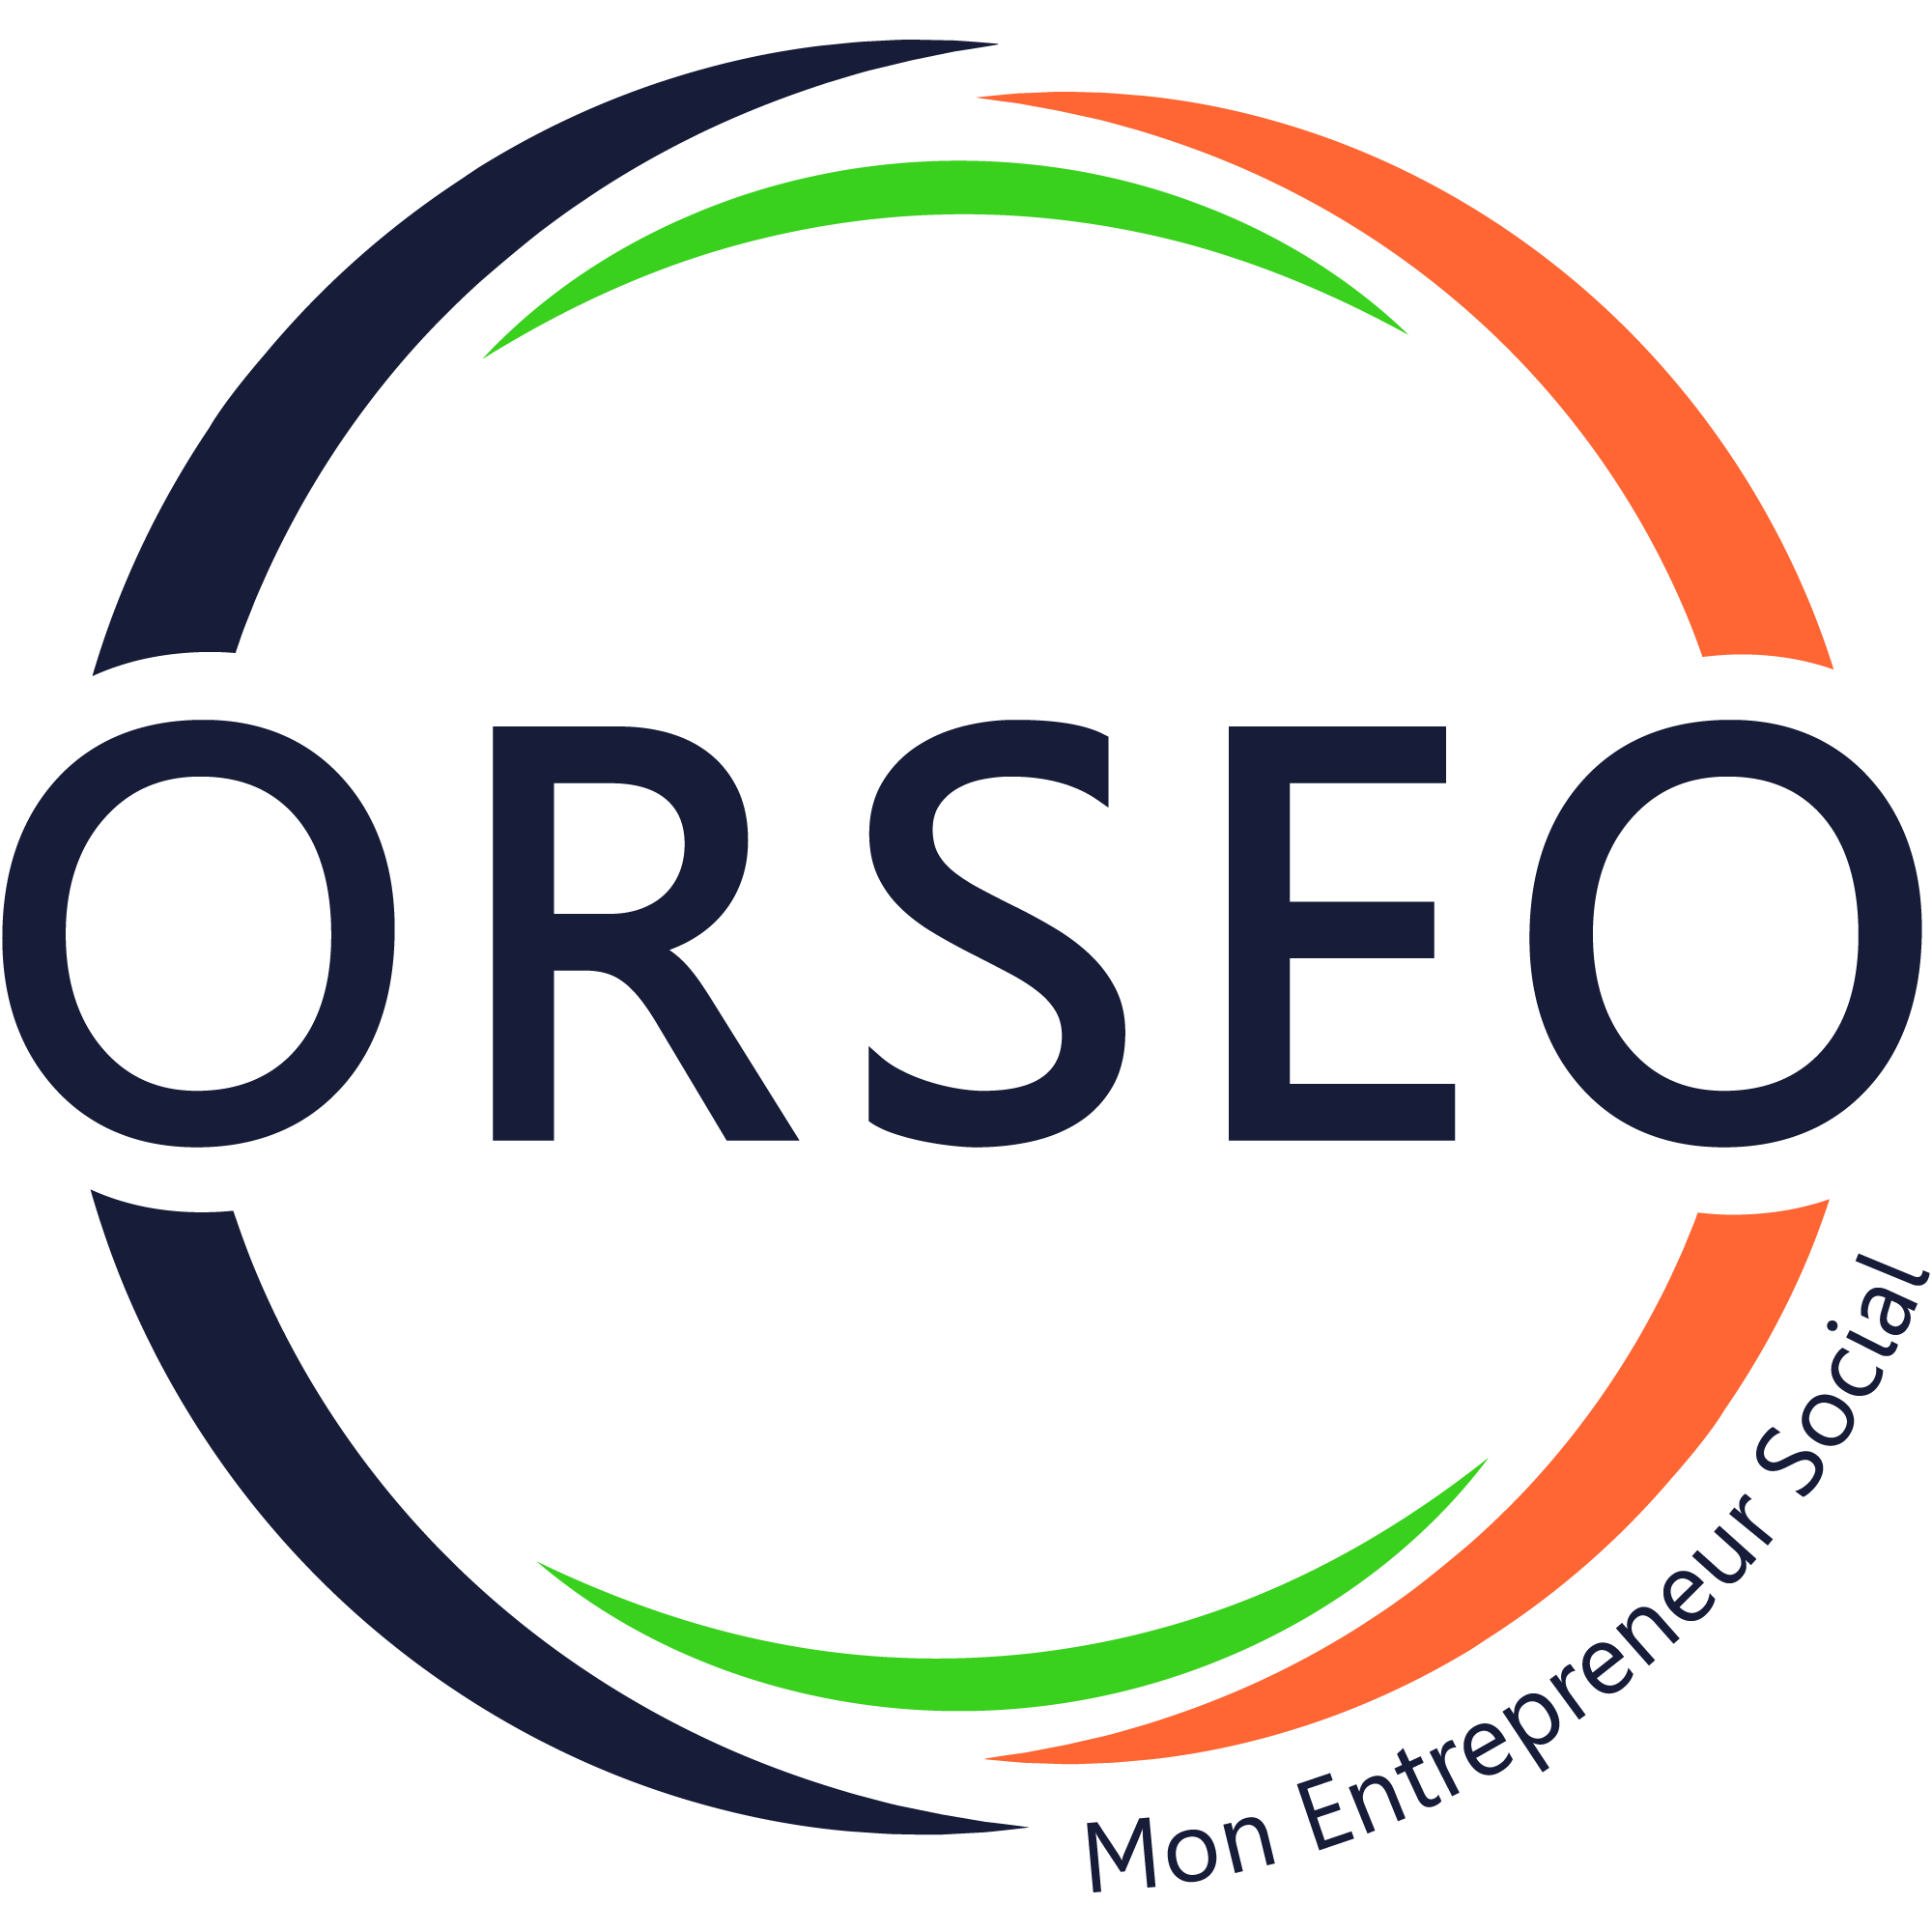 Orseo